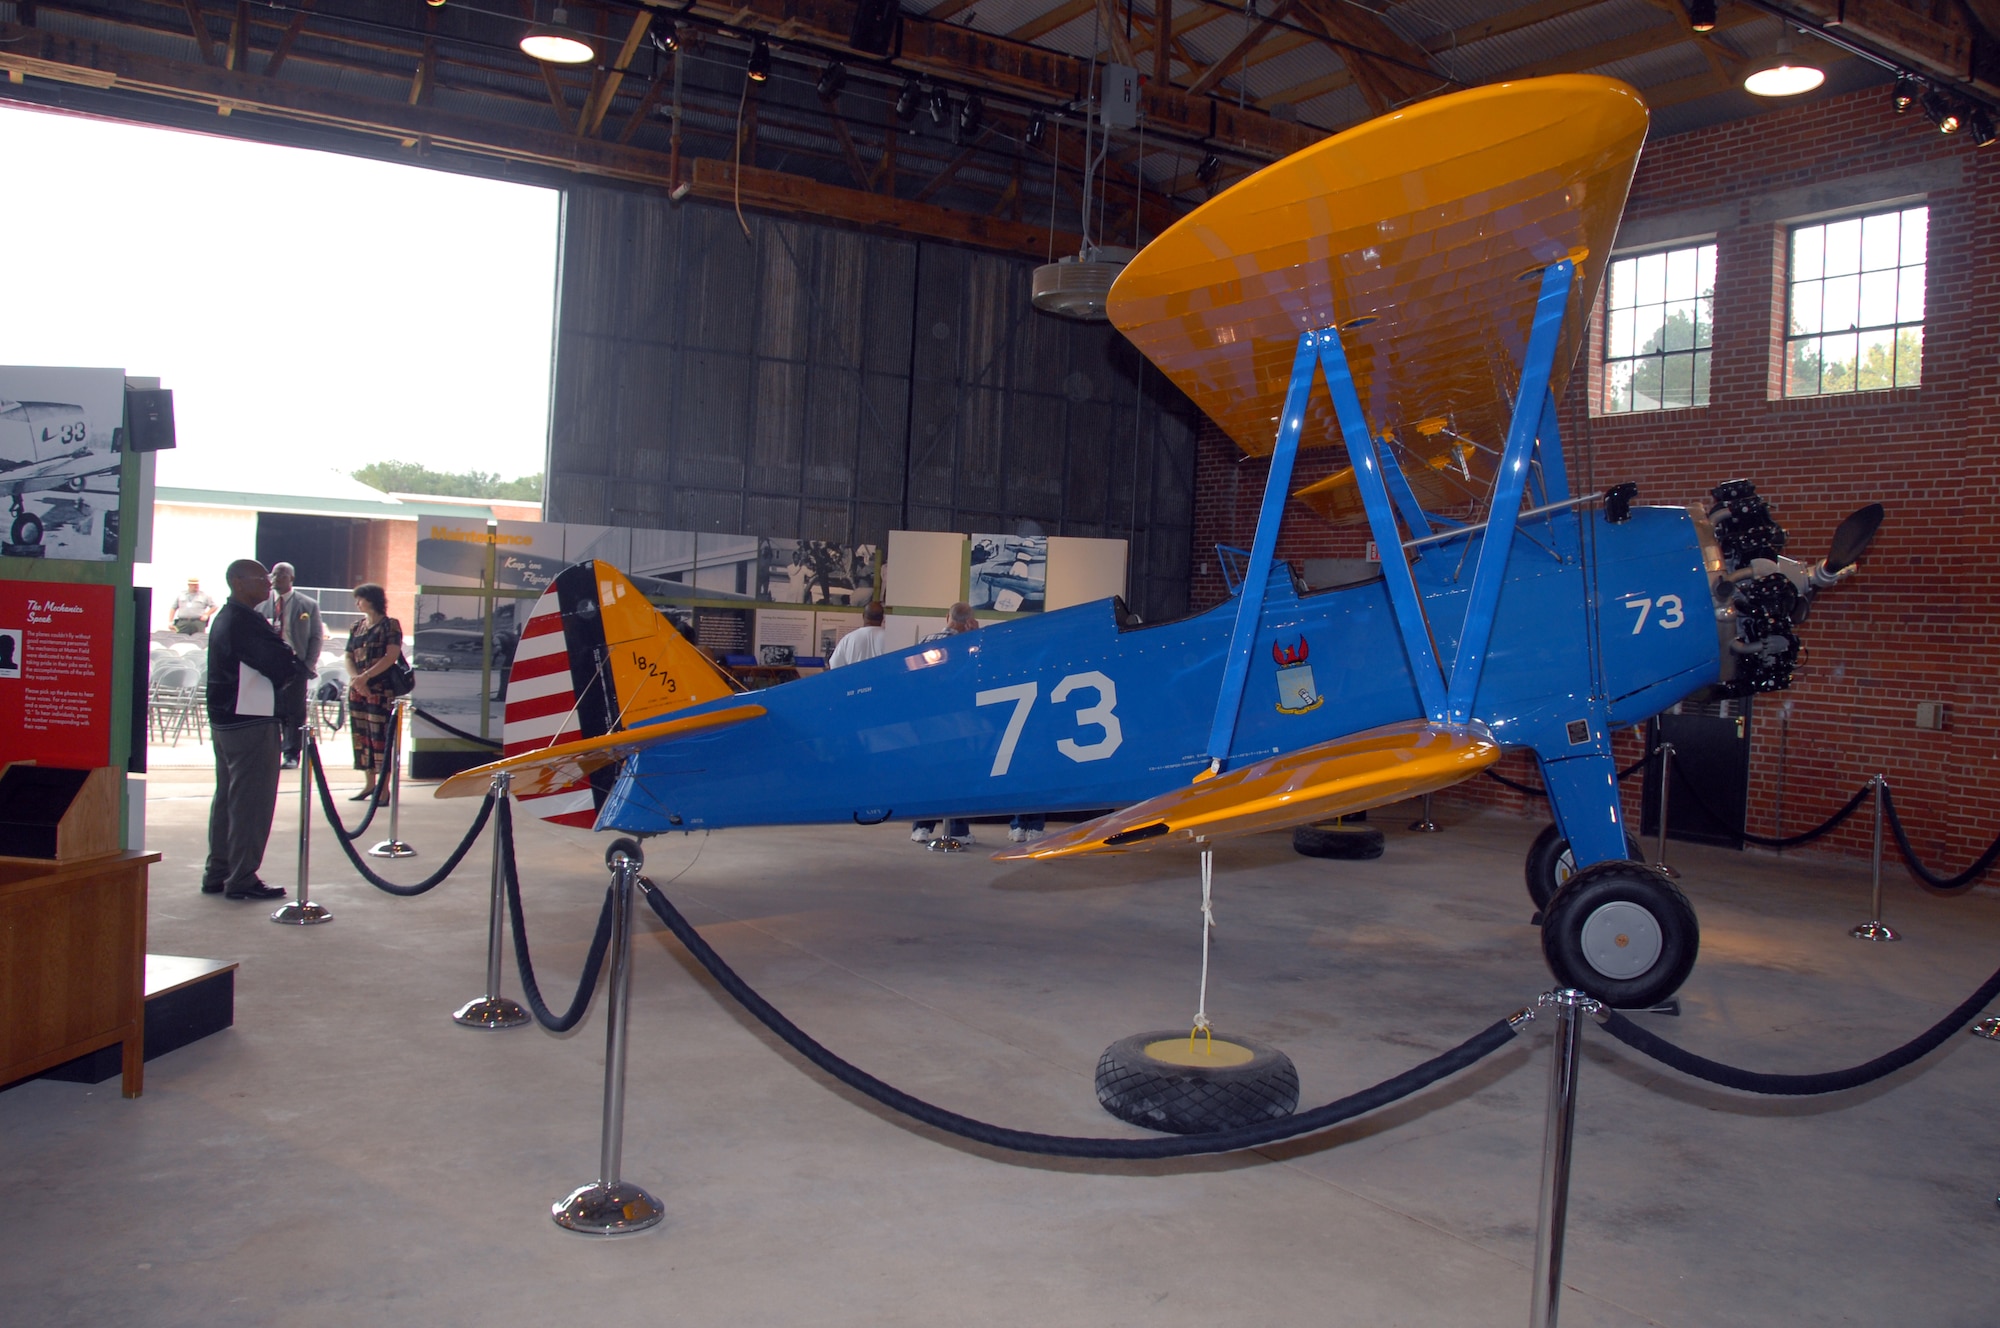 After the opening activities of the Tuskegee Airmen National Historic Site at Moton Field, Ala., visitors explore the interpretive and static displays such as this Stearman P-17 trainer housed the in the only remaining original hangar Oct. 11.  (U.S. Air Force Photo by Lt. Col. Jerry Lobb)         